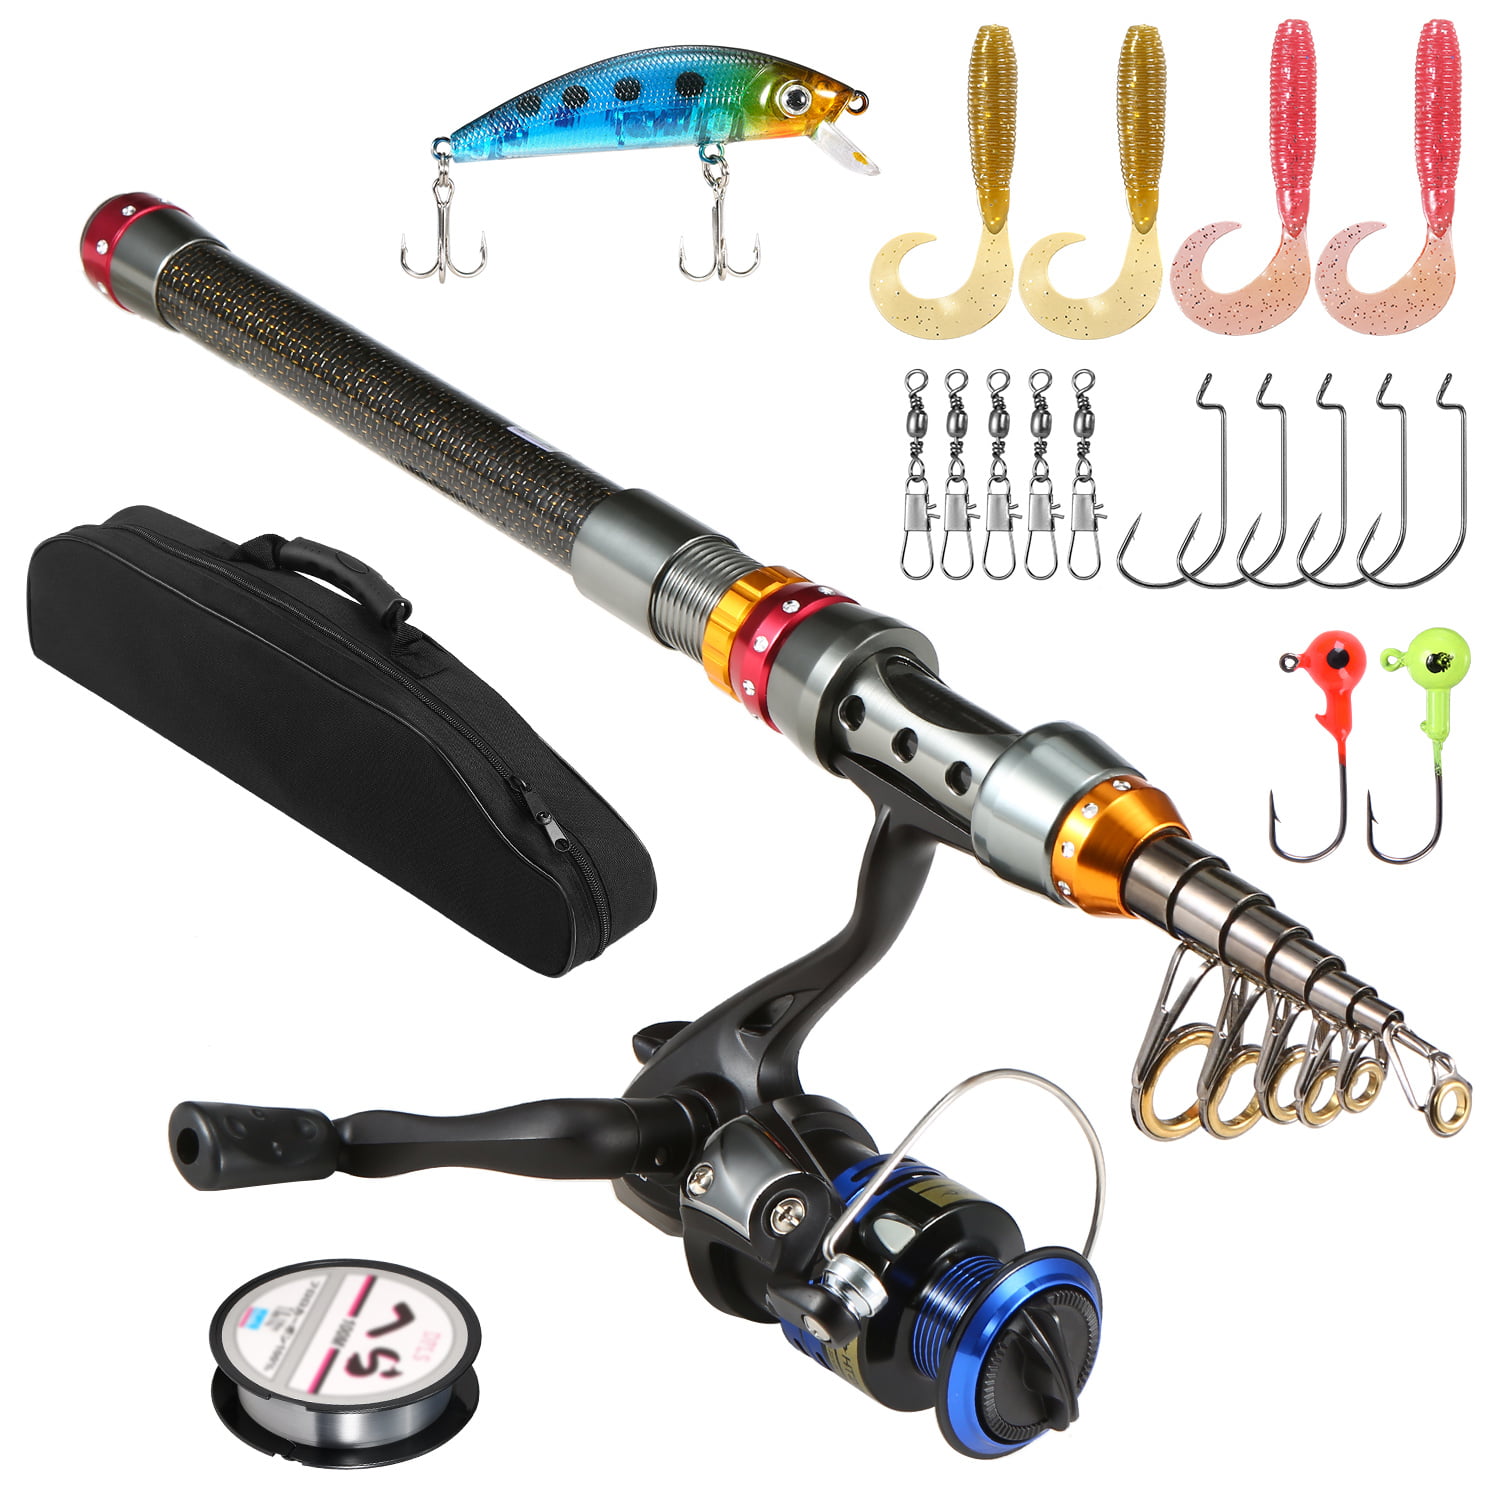 Fishing Kit With Fishing Rod/Spinning Reel/Sea Rod/Line/Lure Case Fishing Tackle 